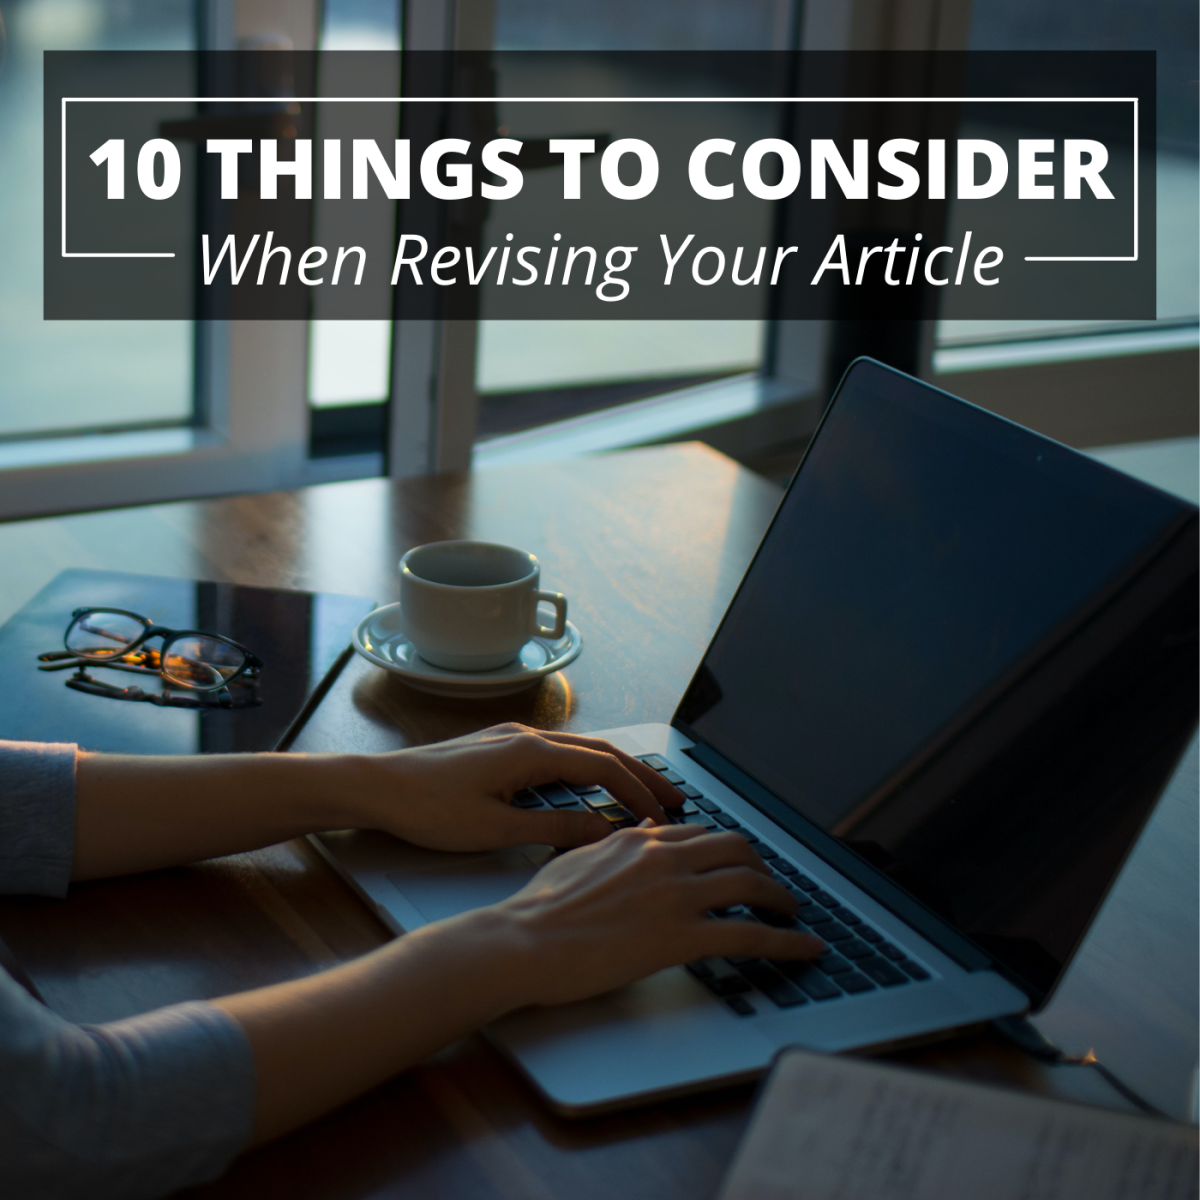 10 Tips for Revising and Updating Your Article or Blog Post